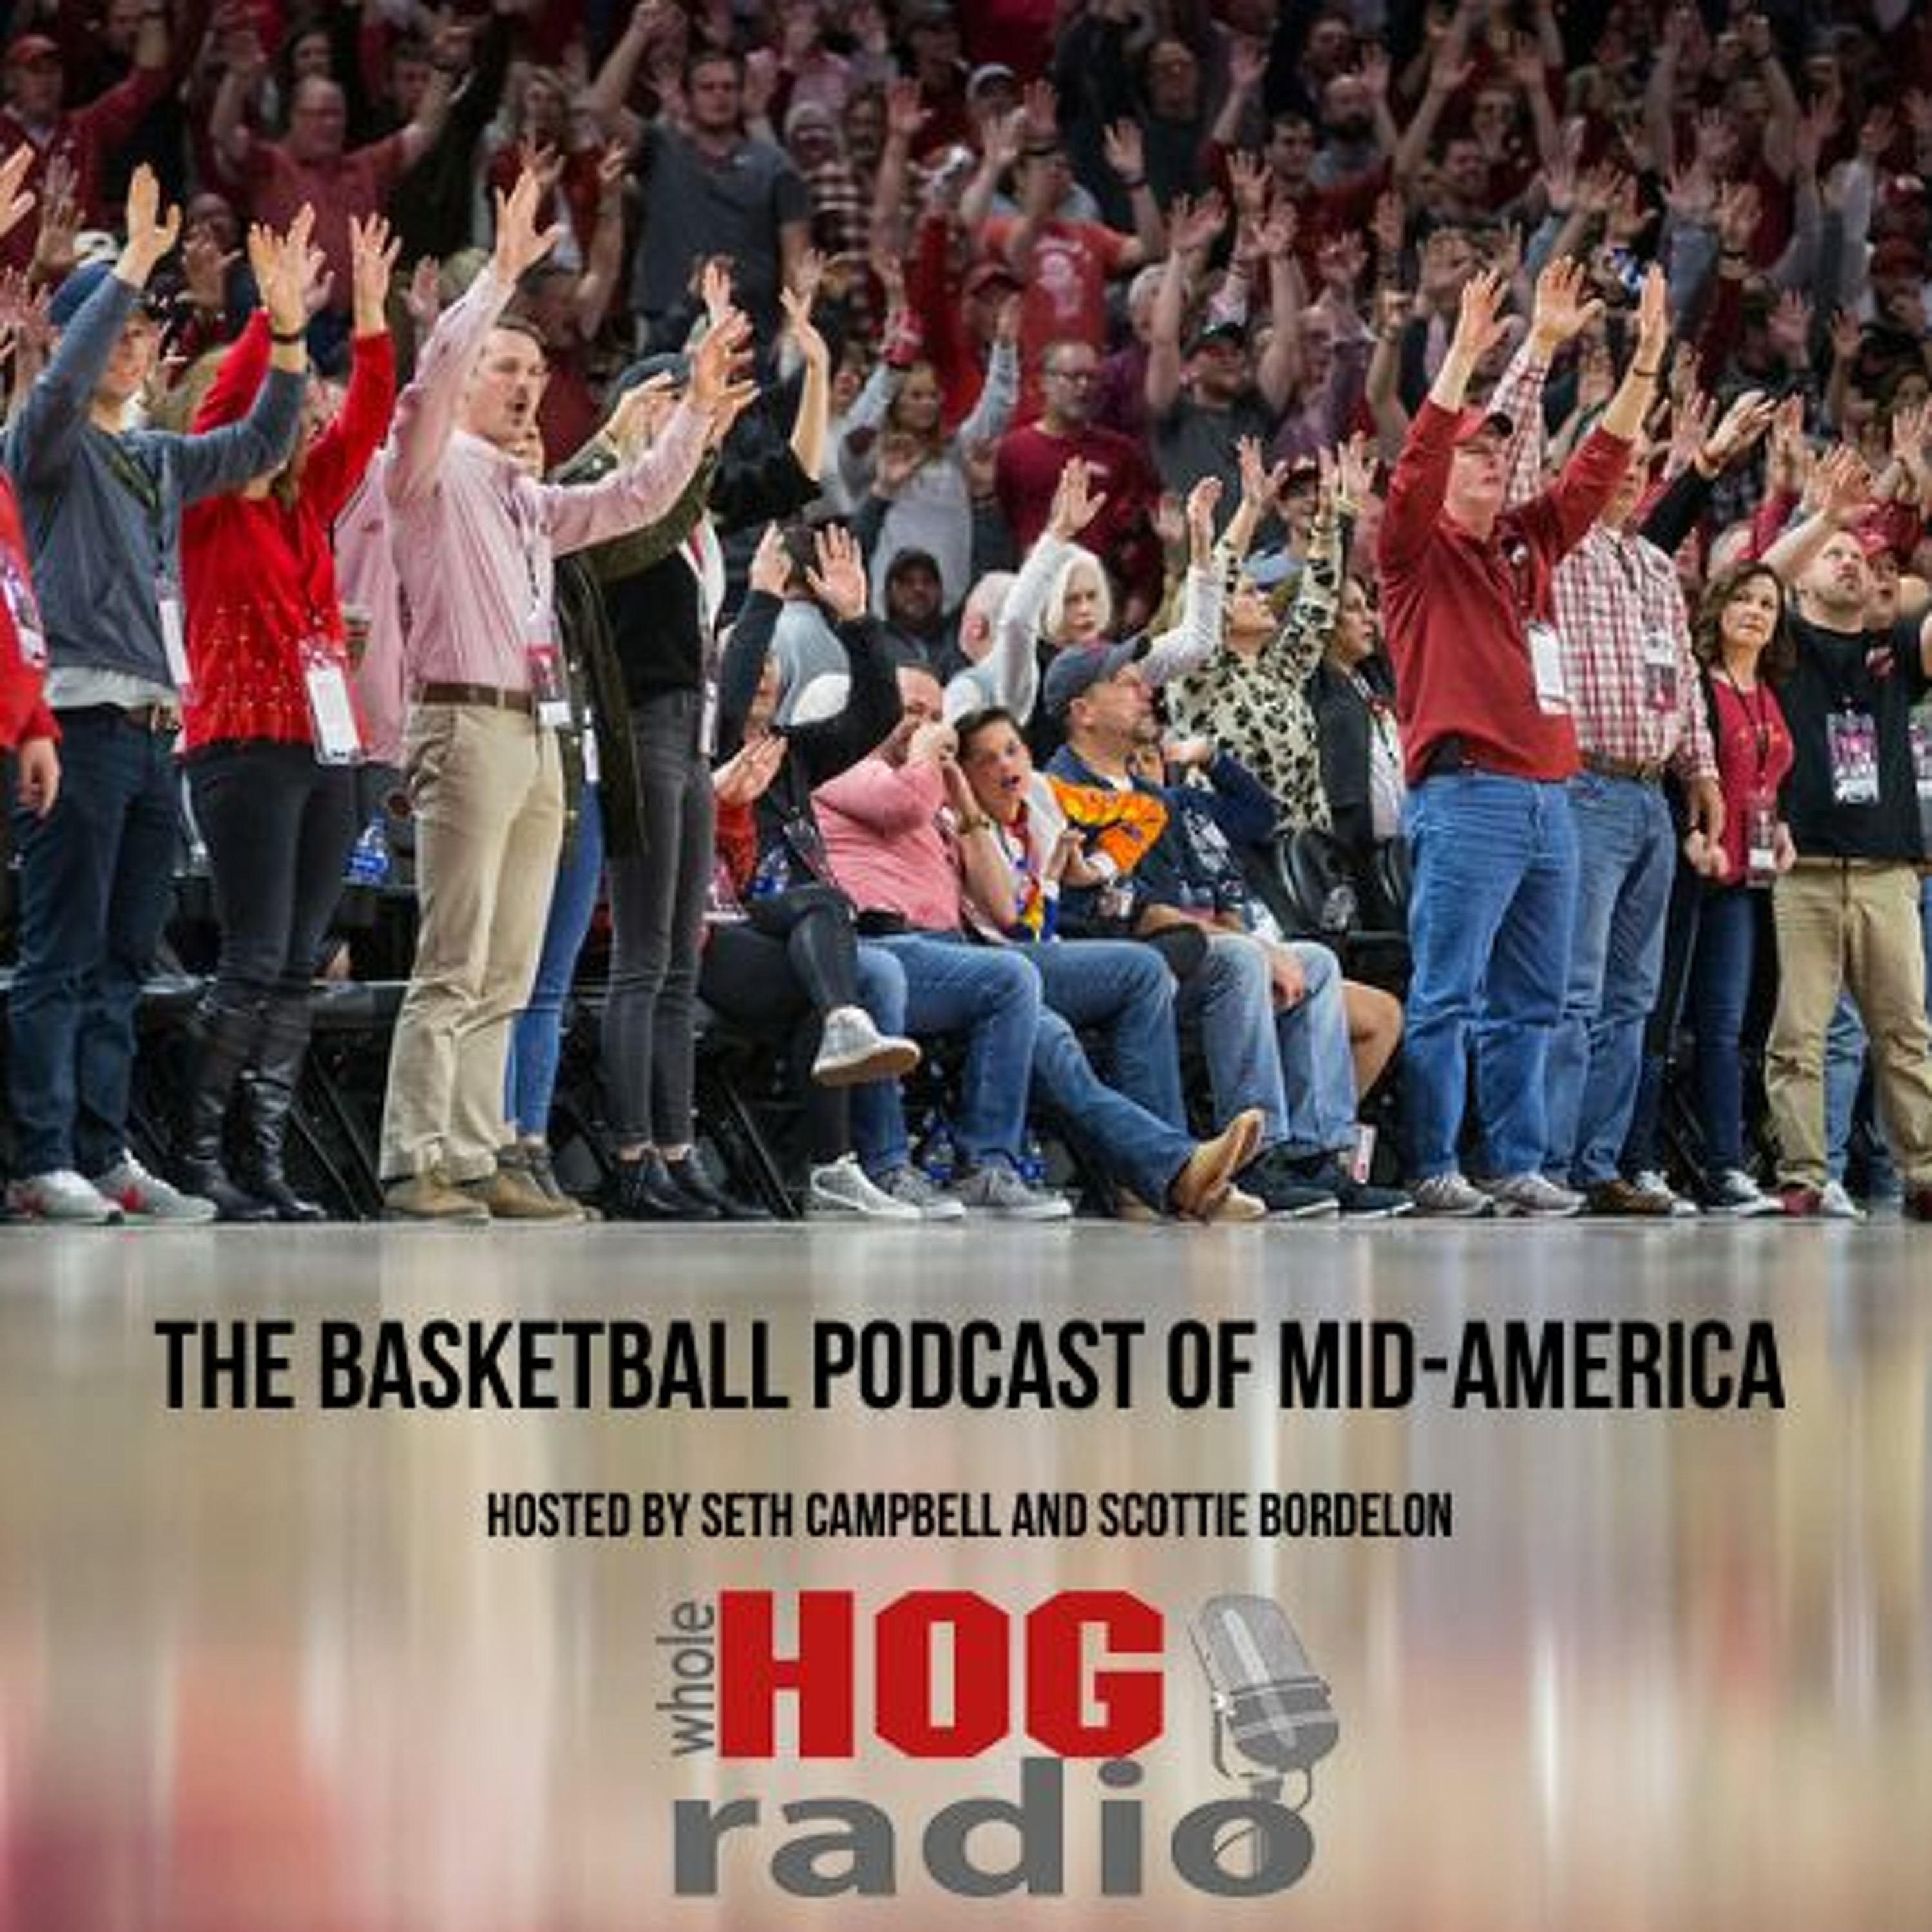 Basketball Podcast of Mid-America: Corey Williams, Jersey Wolfenbarger and more